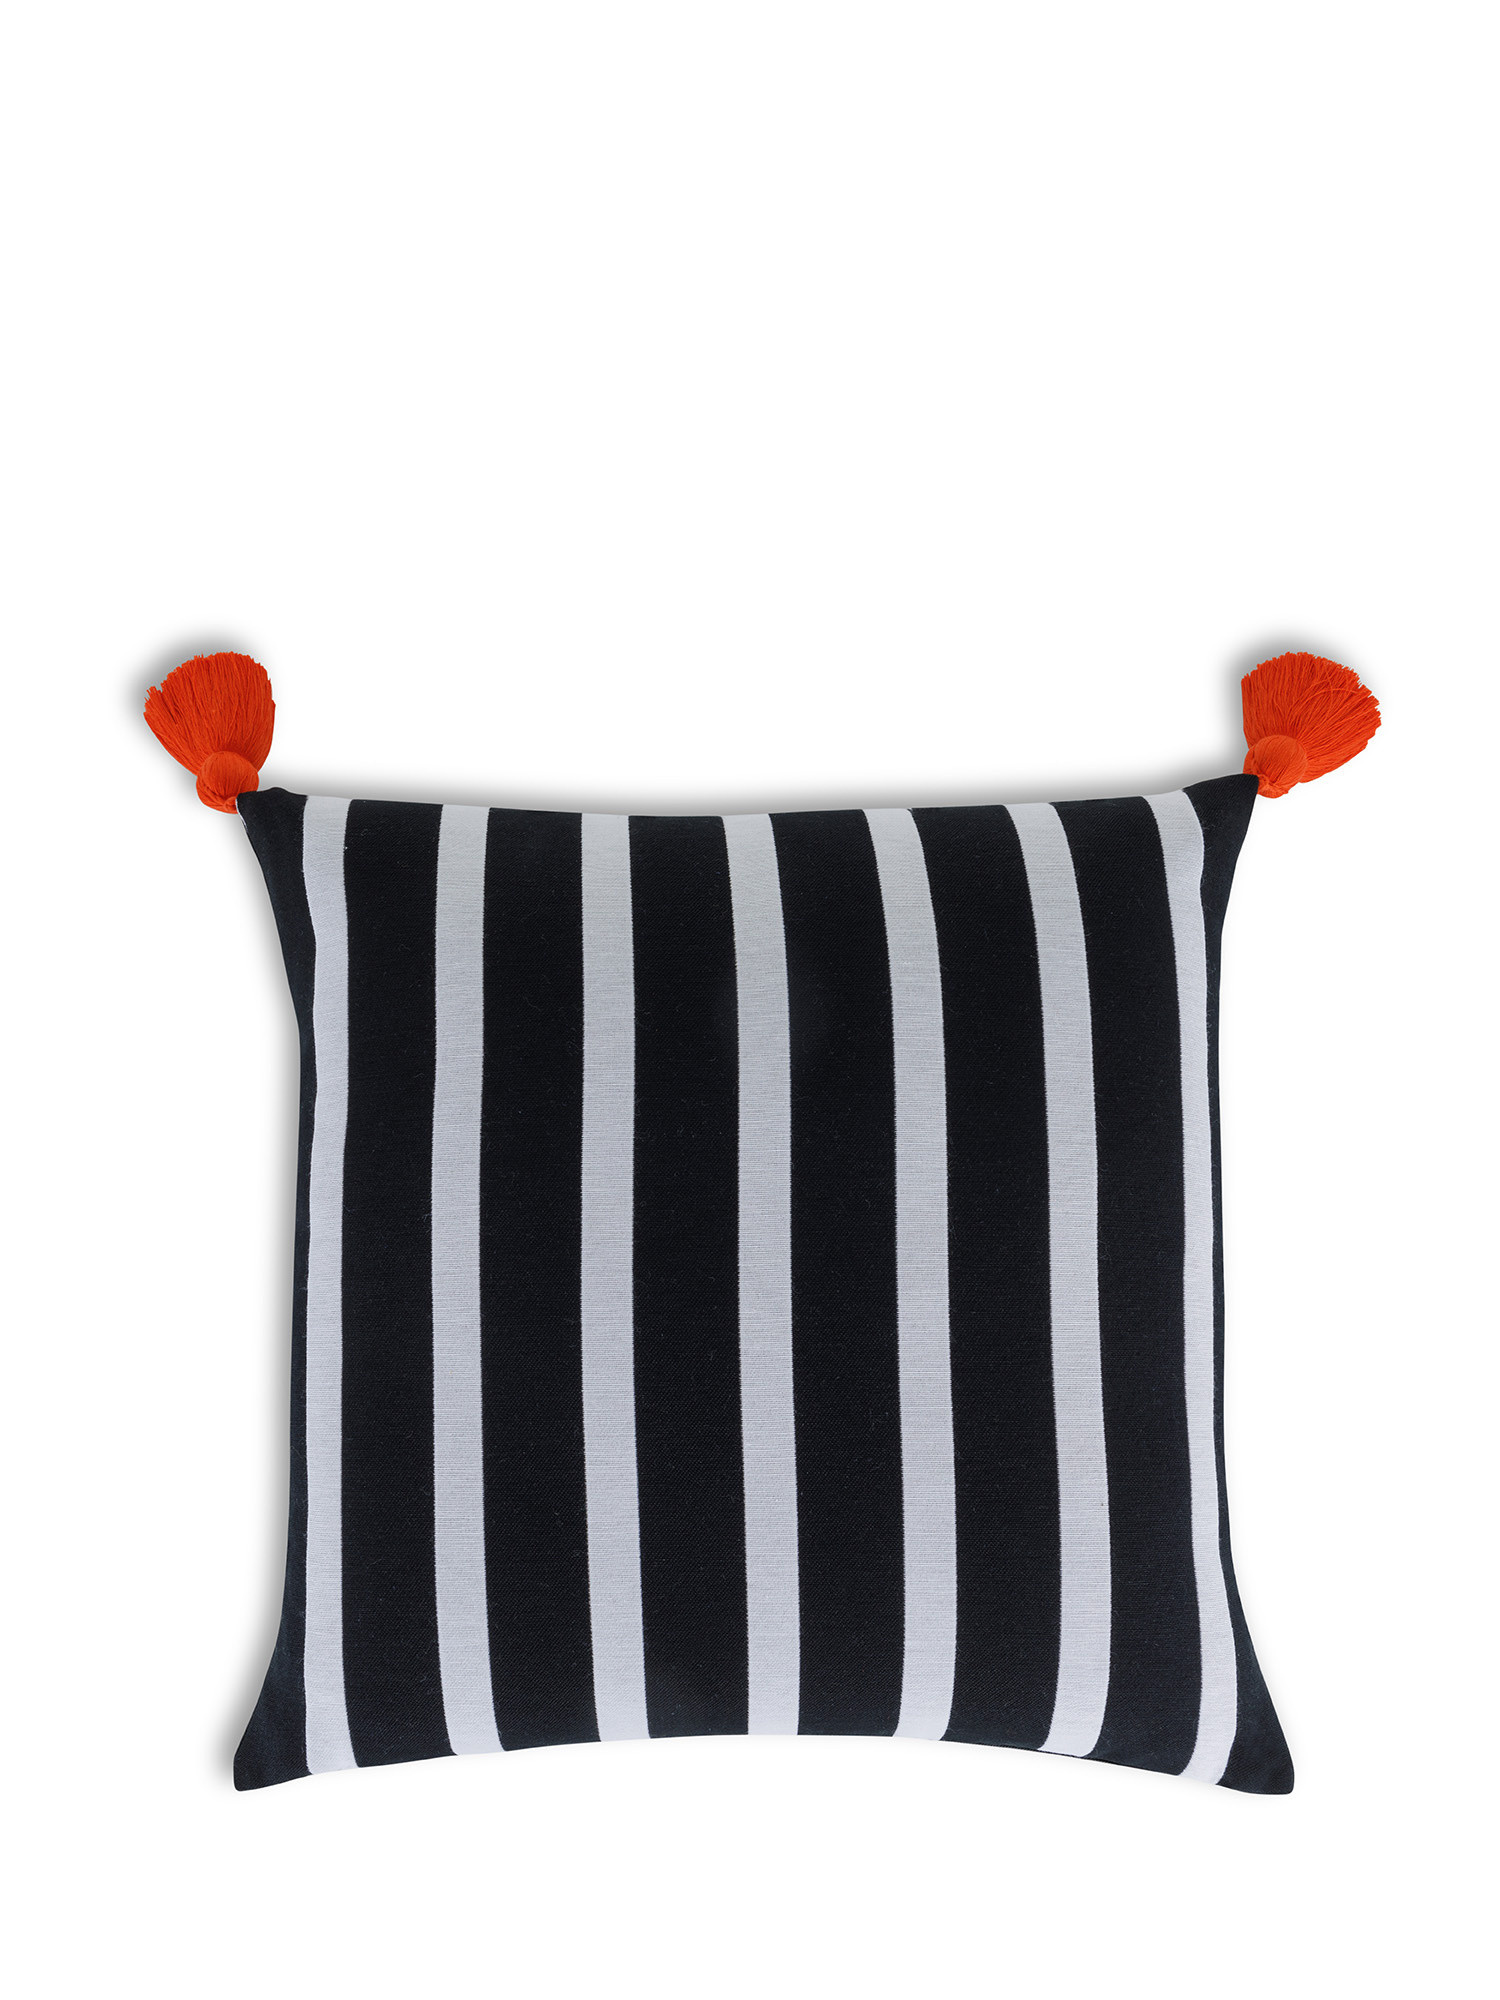 Striped cushion with tassels 45x45 cm, Black, large image number 1